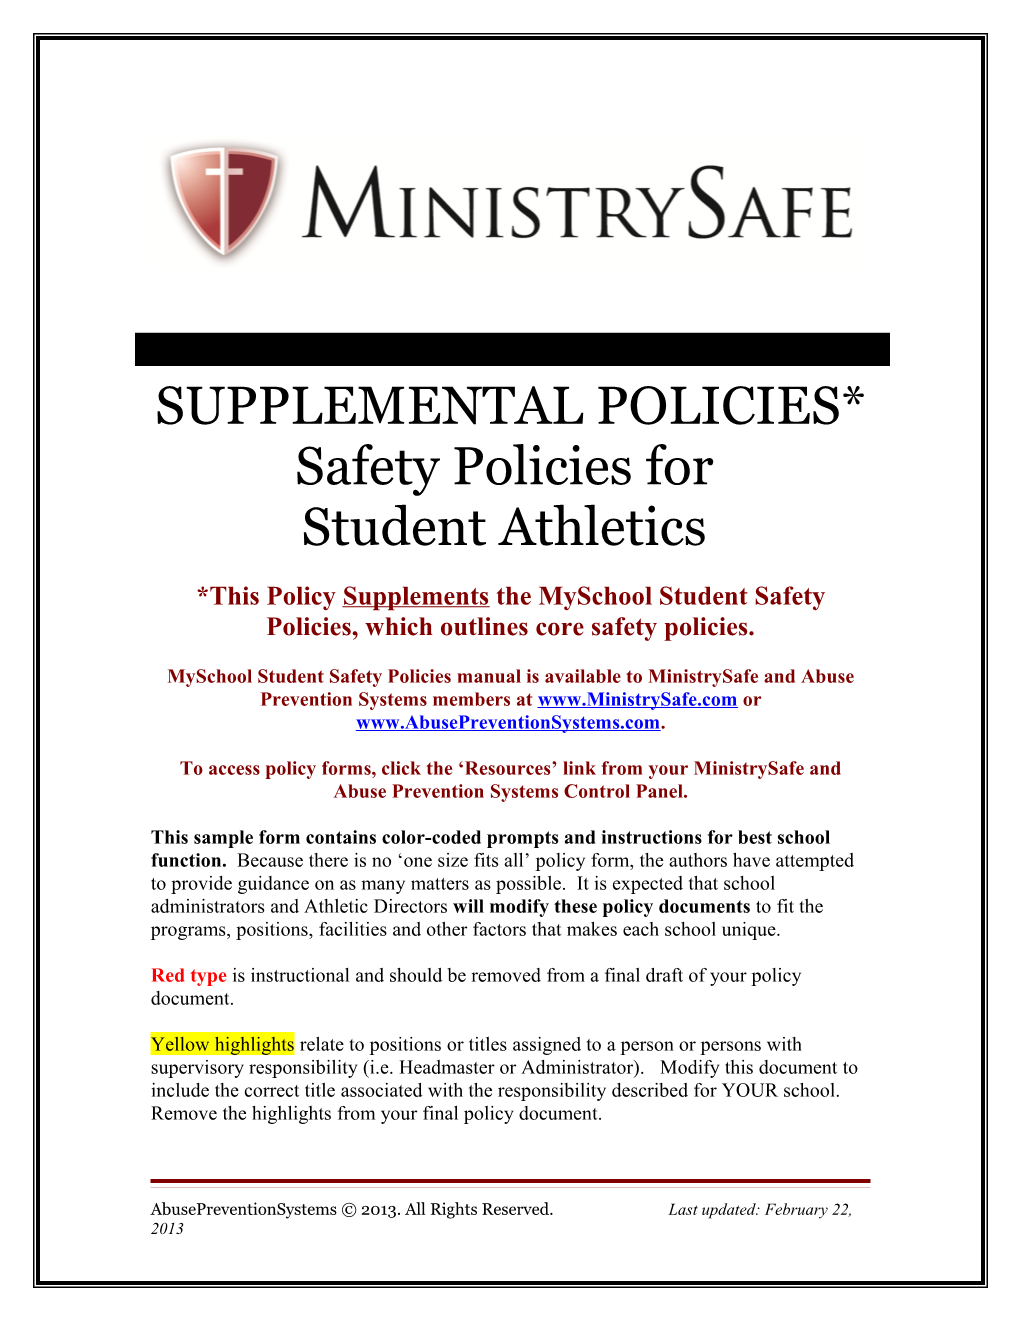 SUPPLEMENTAL POLICIES*Safety Policies For